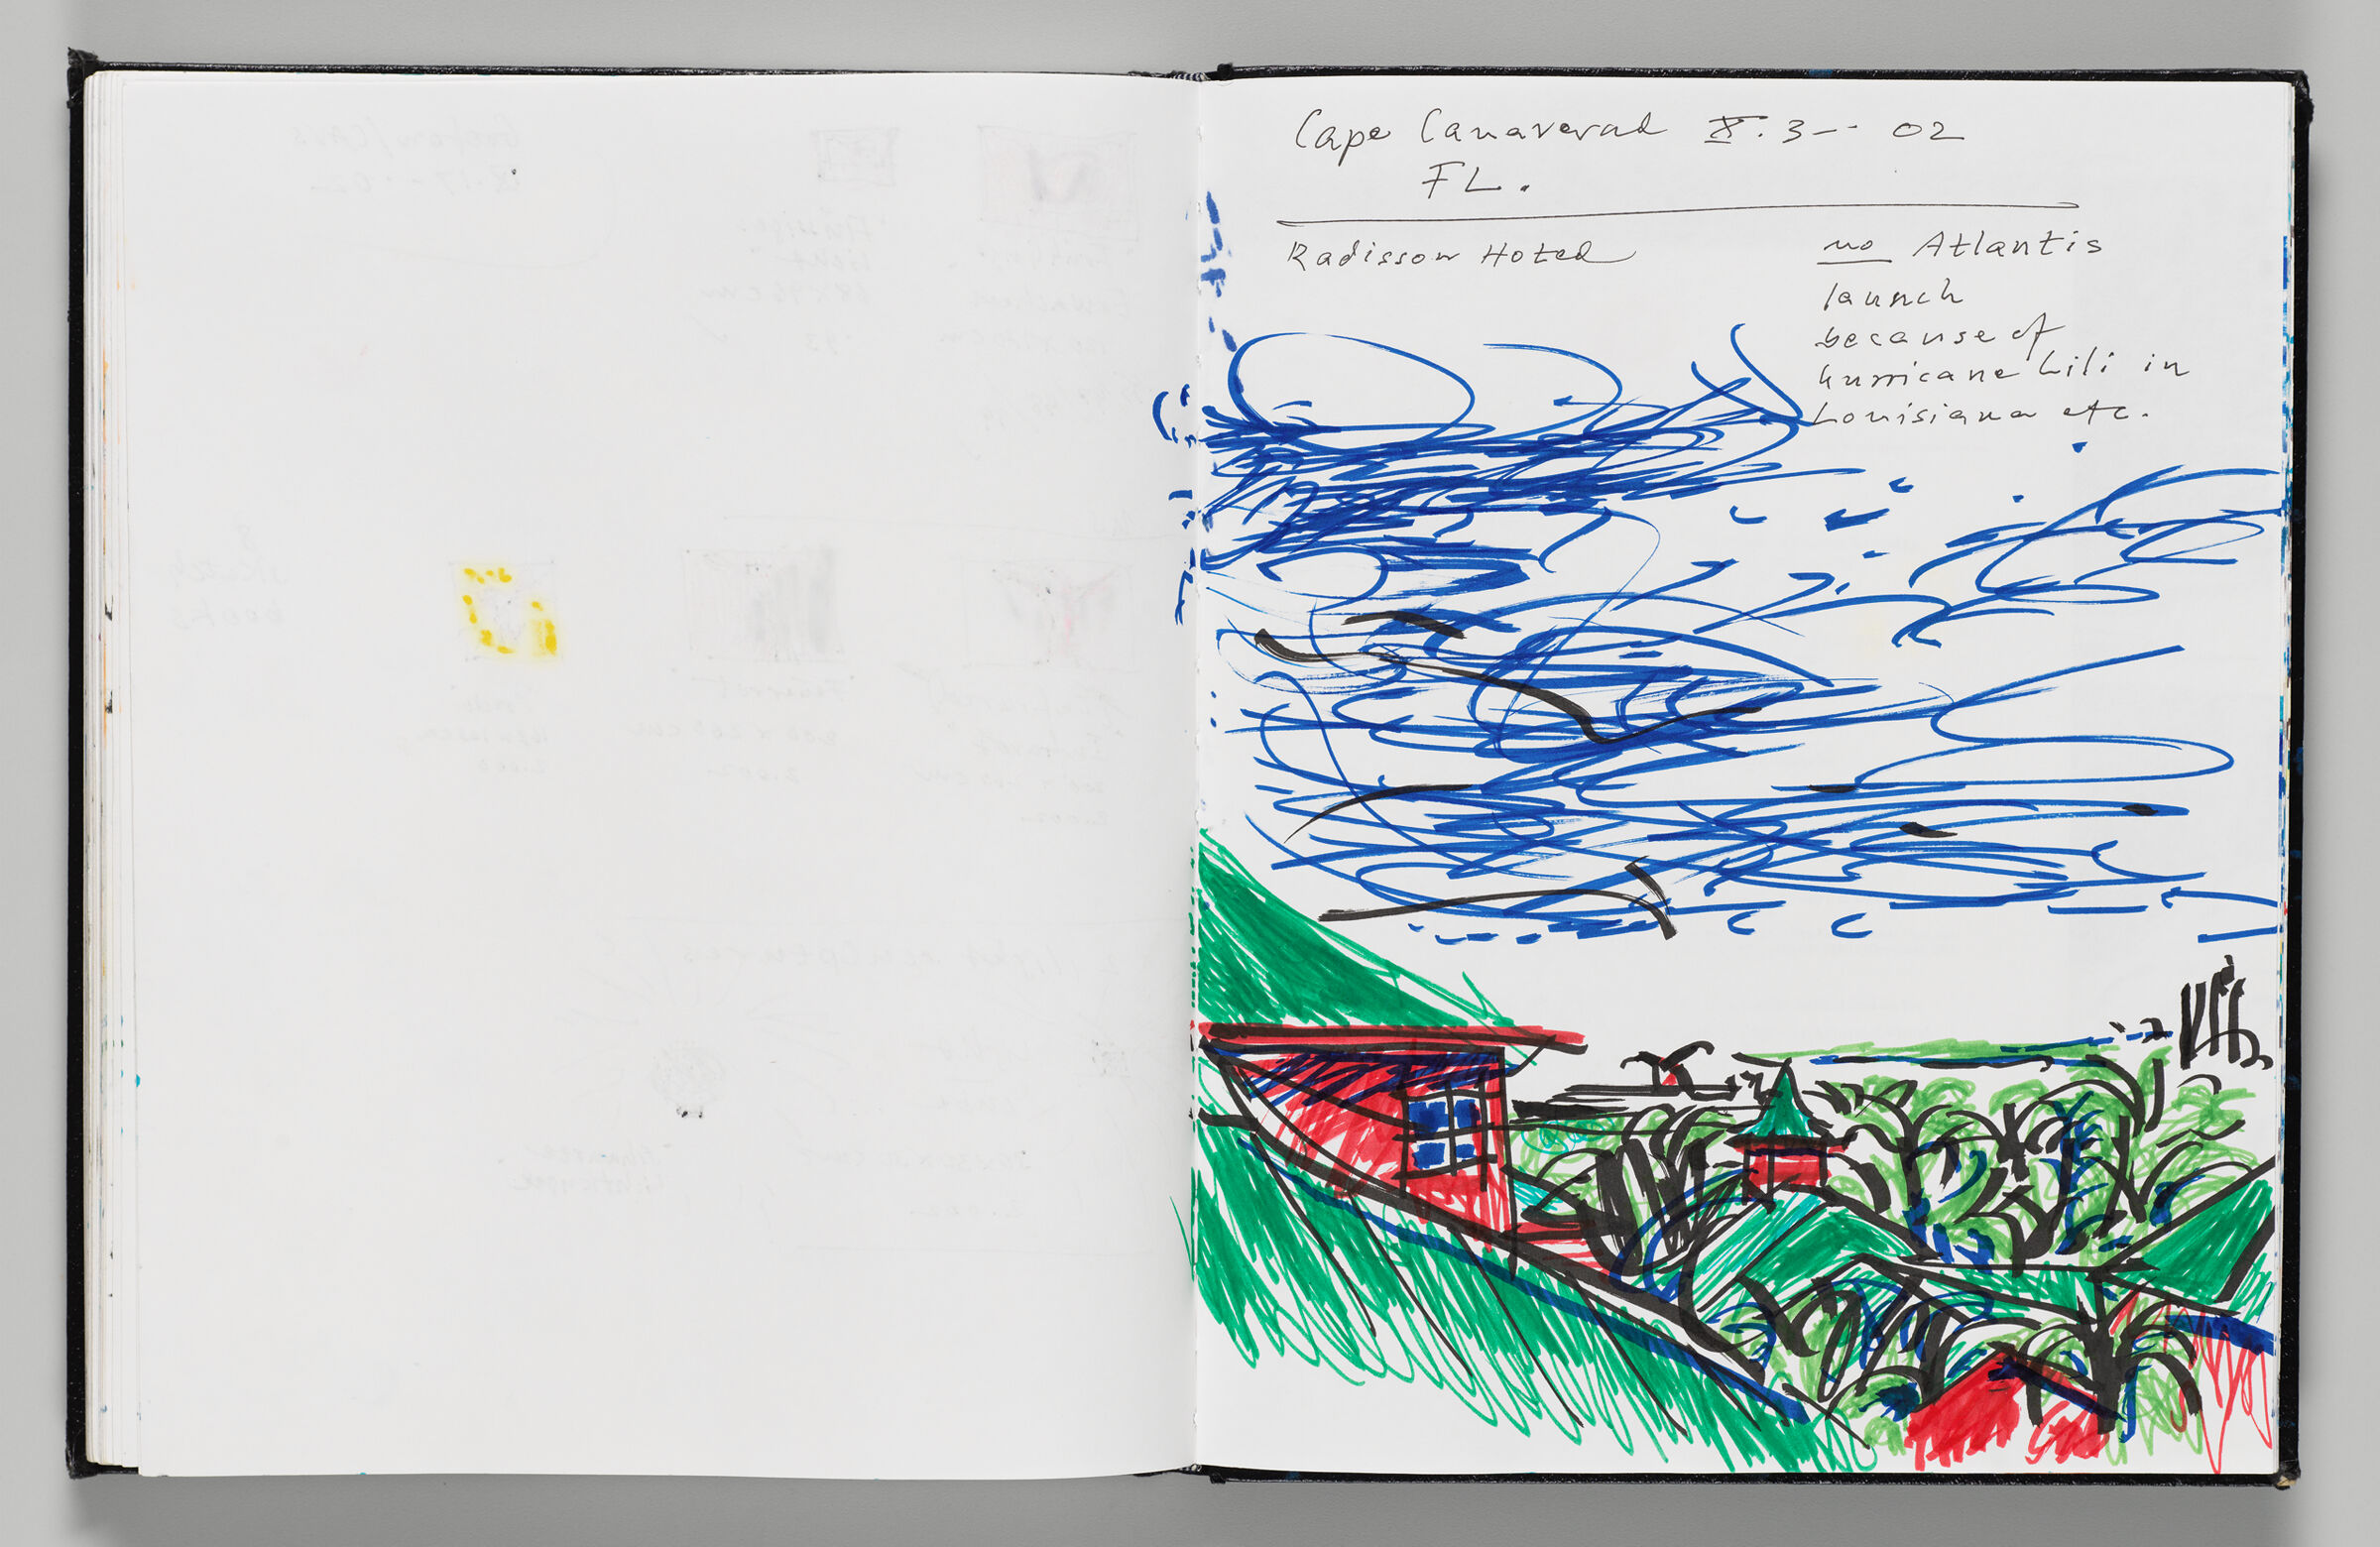 Untitled (Bleed-Through Of Previous Page, Left Page); Untitled (View Of Cape Canaveral, Fl, Right Page)